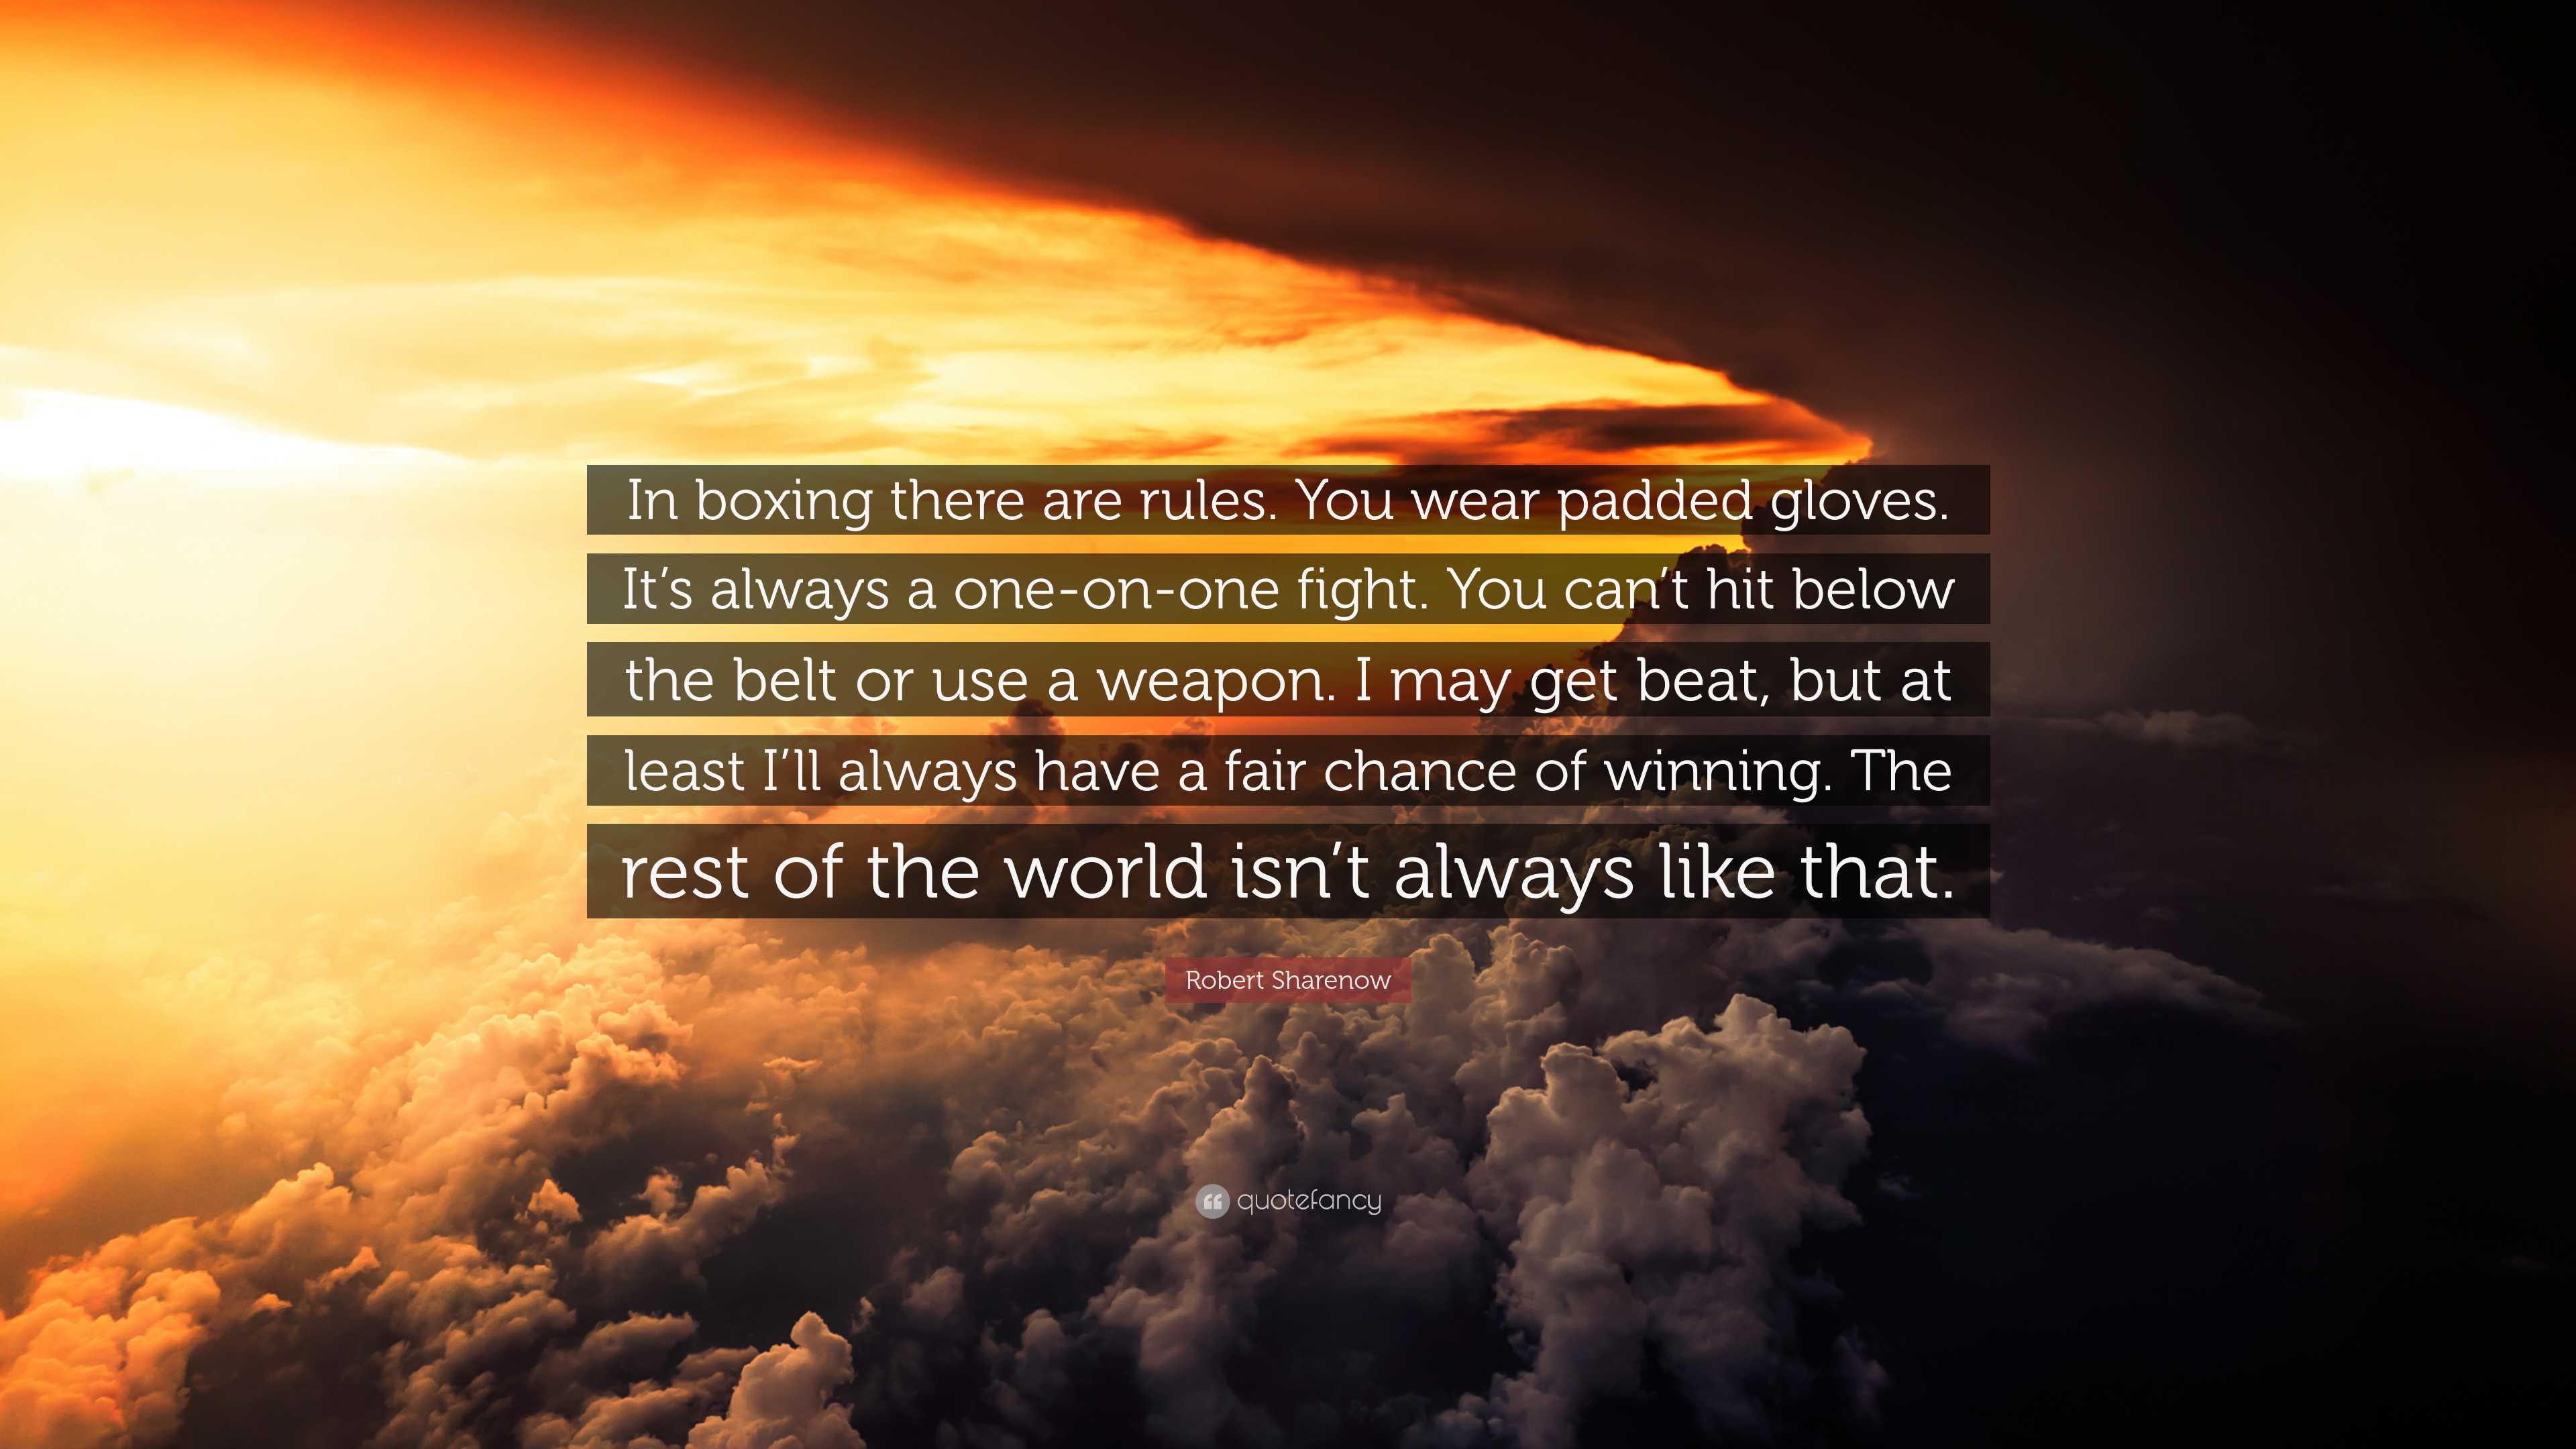 Robert Sharenow Quote: “In boxing there are rules. You wear padded